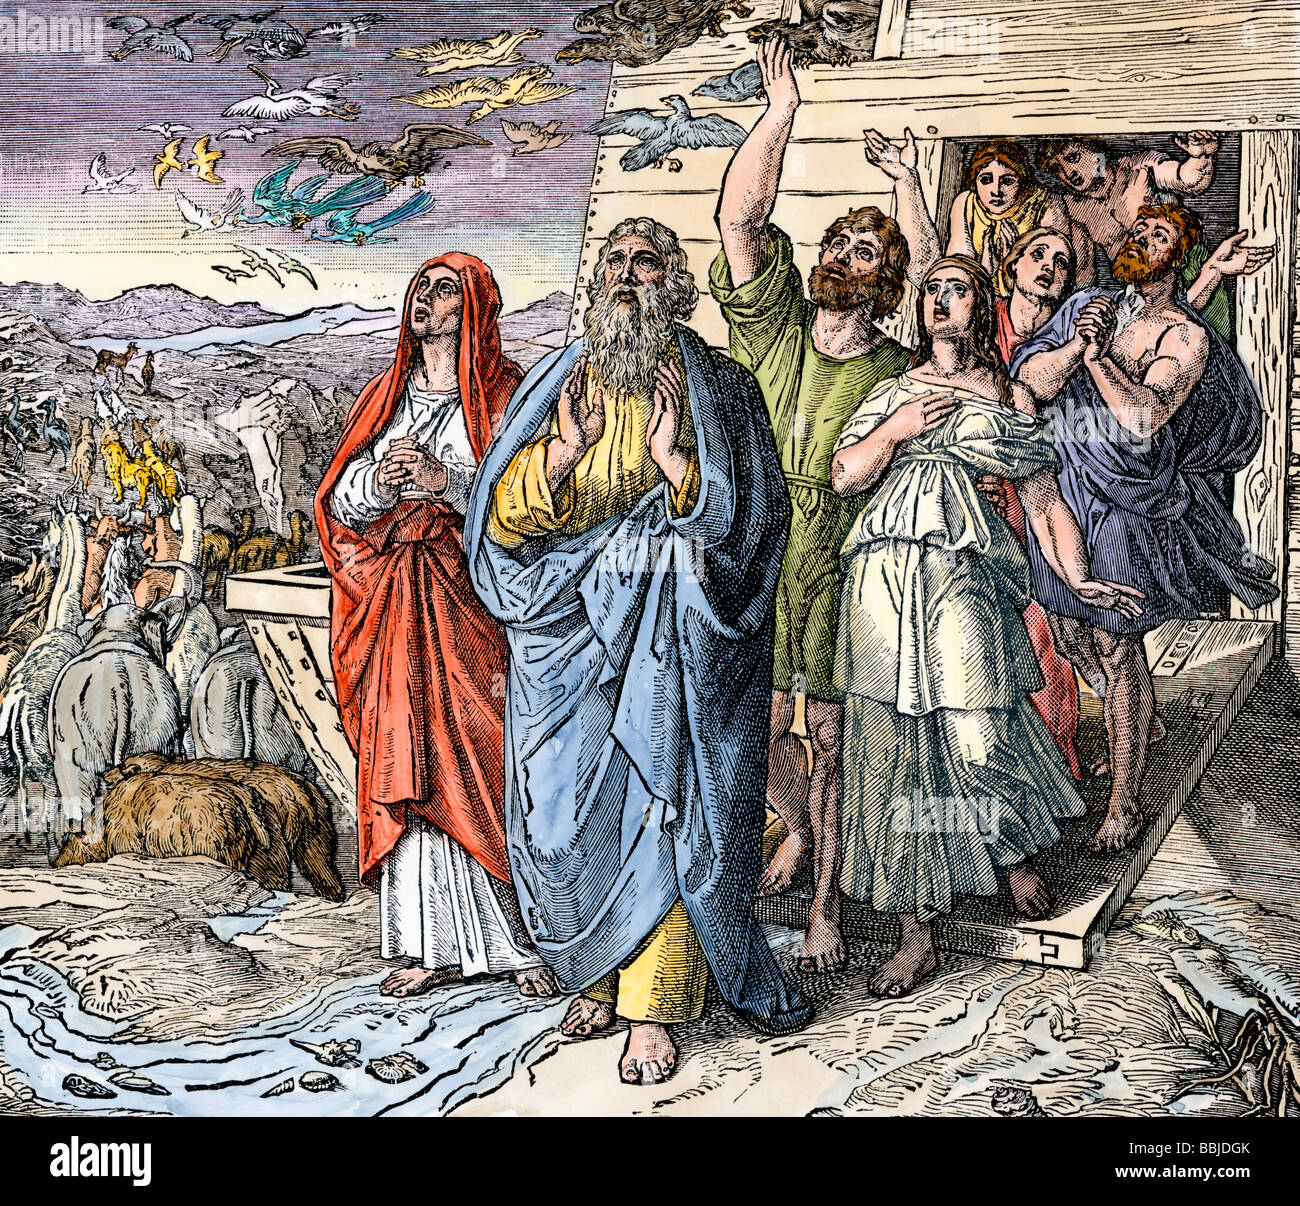 Noah and his family emerging from the ark after the flood. Hand-colored woodcut Stock Photo